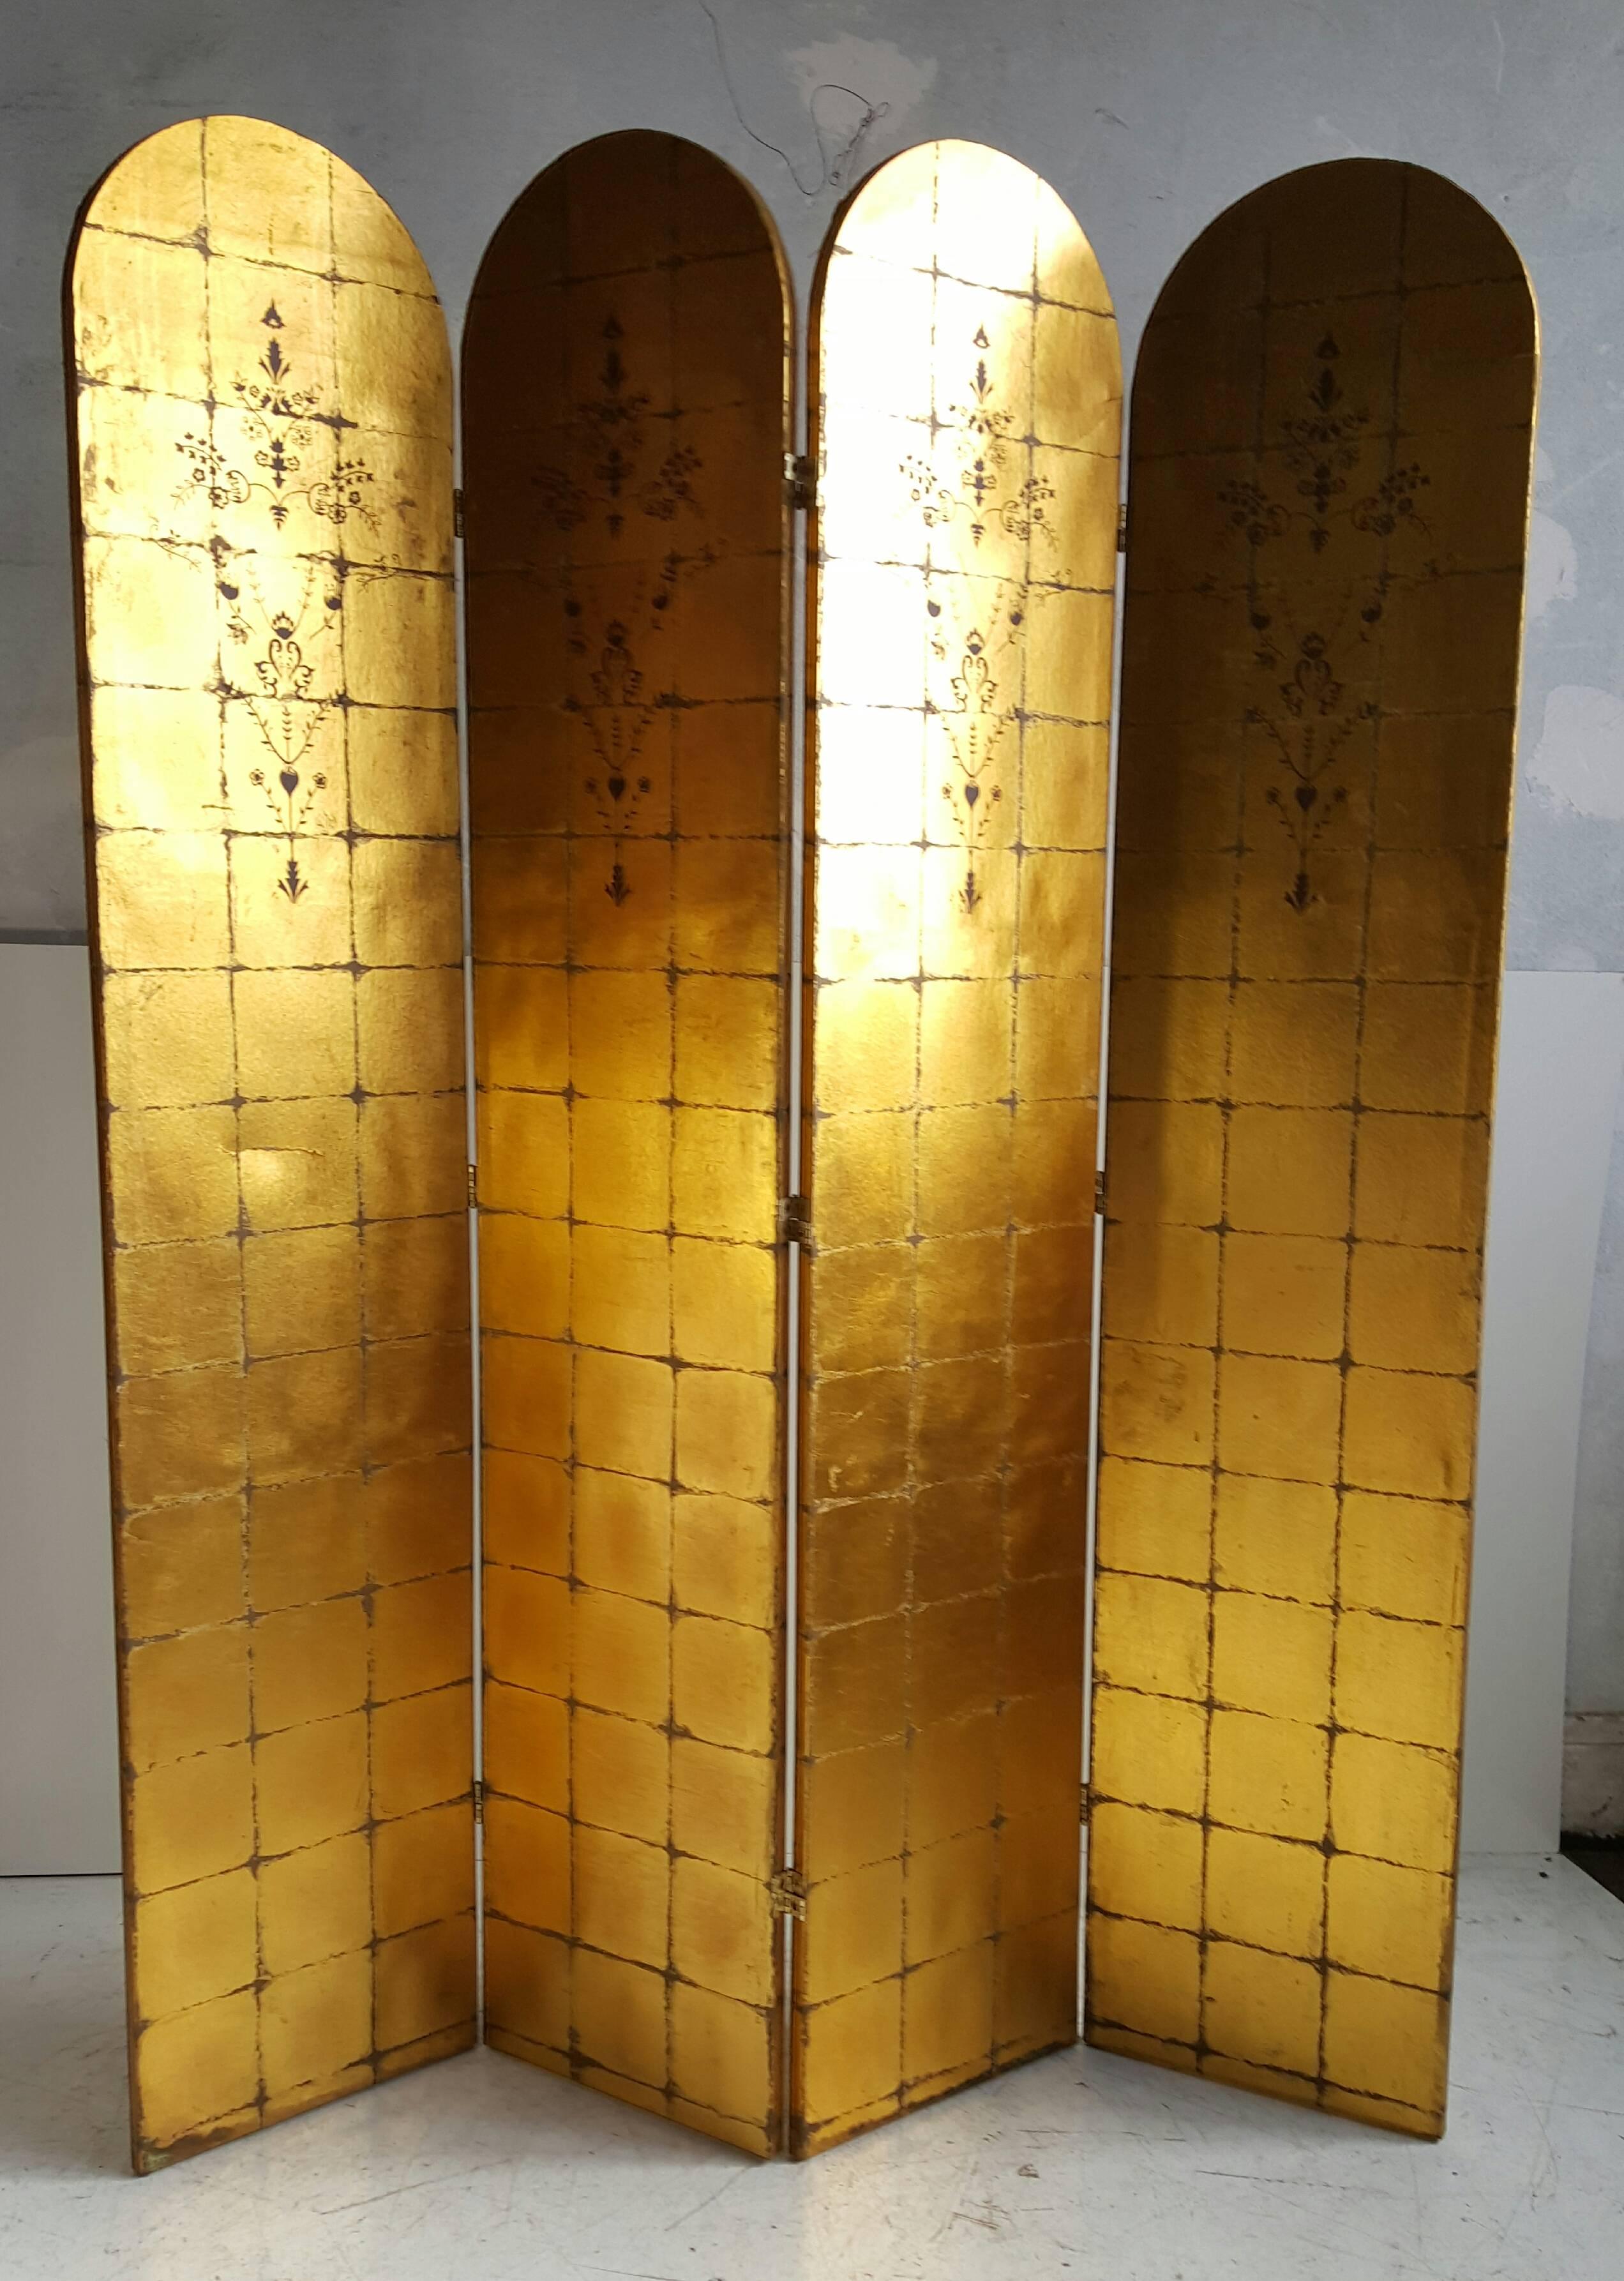 Highly decorated four-panel folding screen or divider, gold leaf, made in Italy, most likely custom, double sided, one side showing hand decorated 